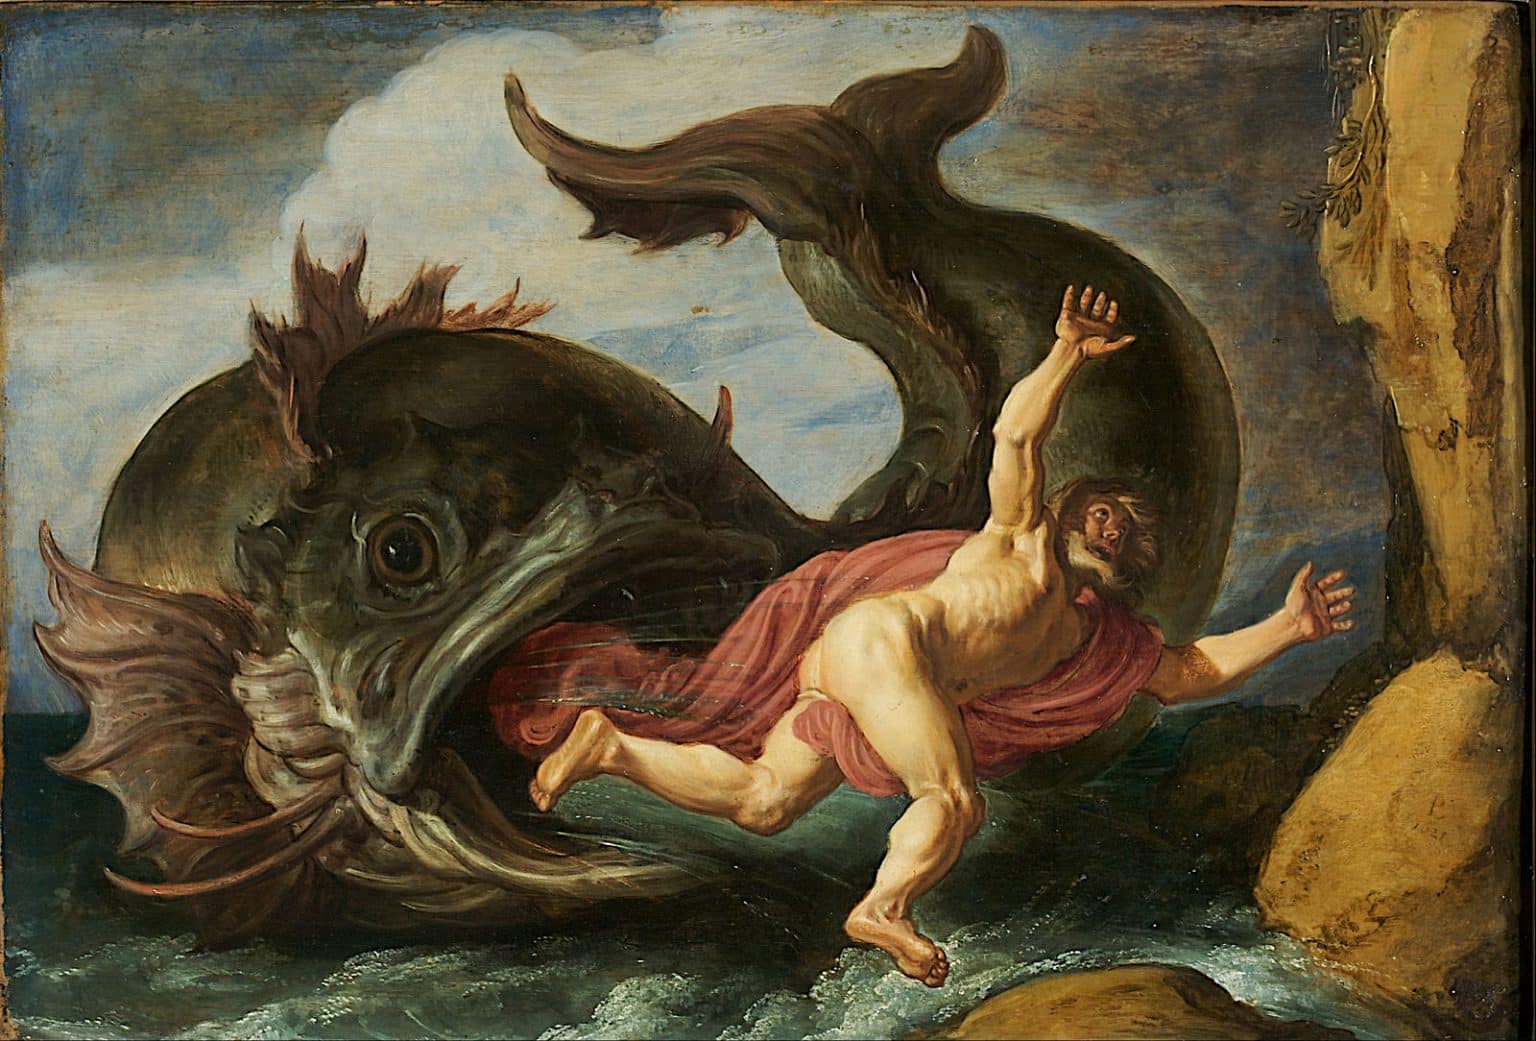 the story of Jonah in the bible